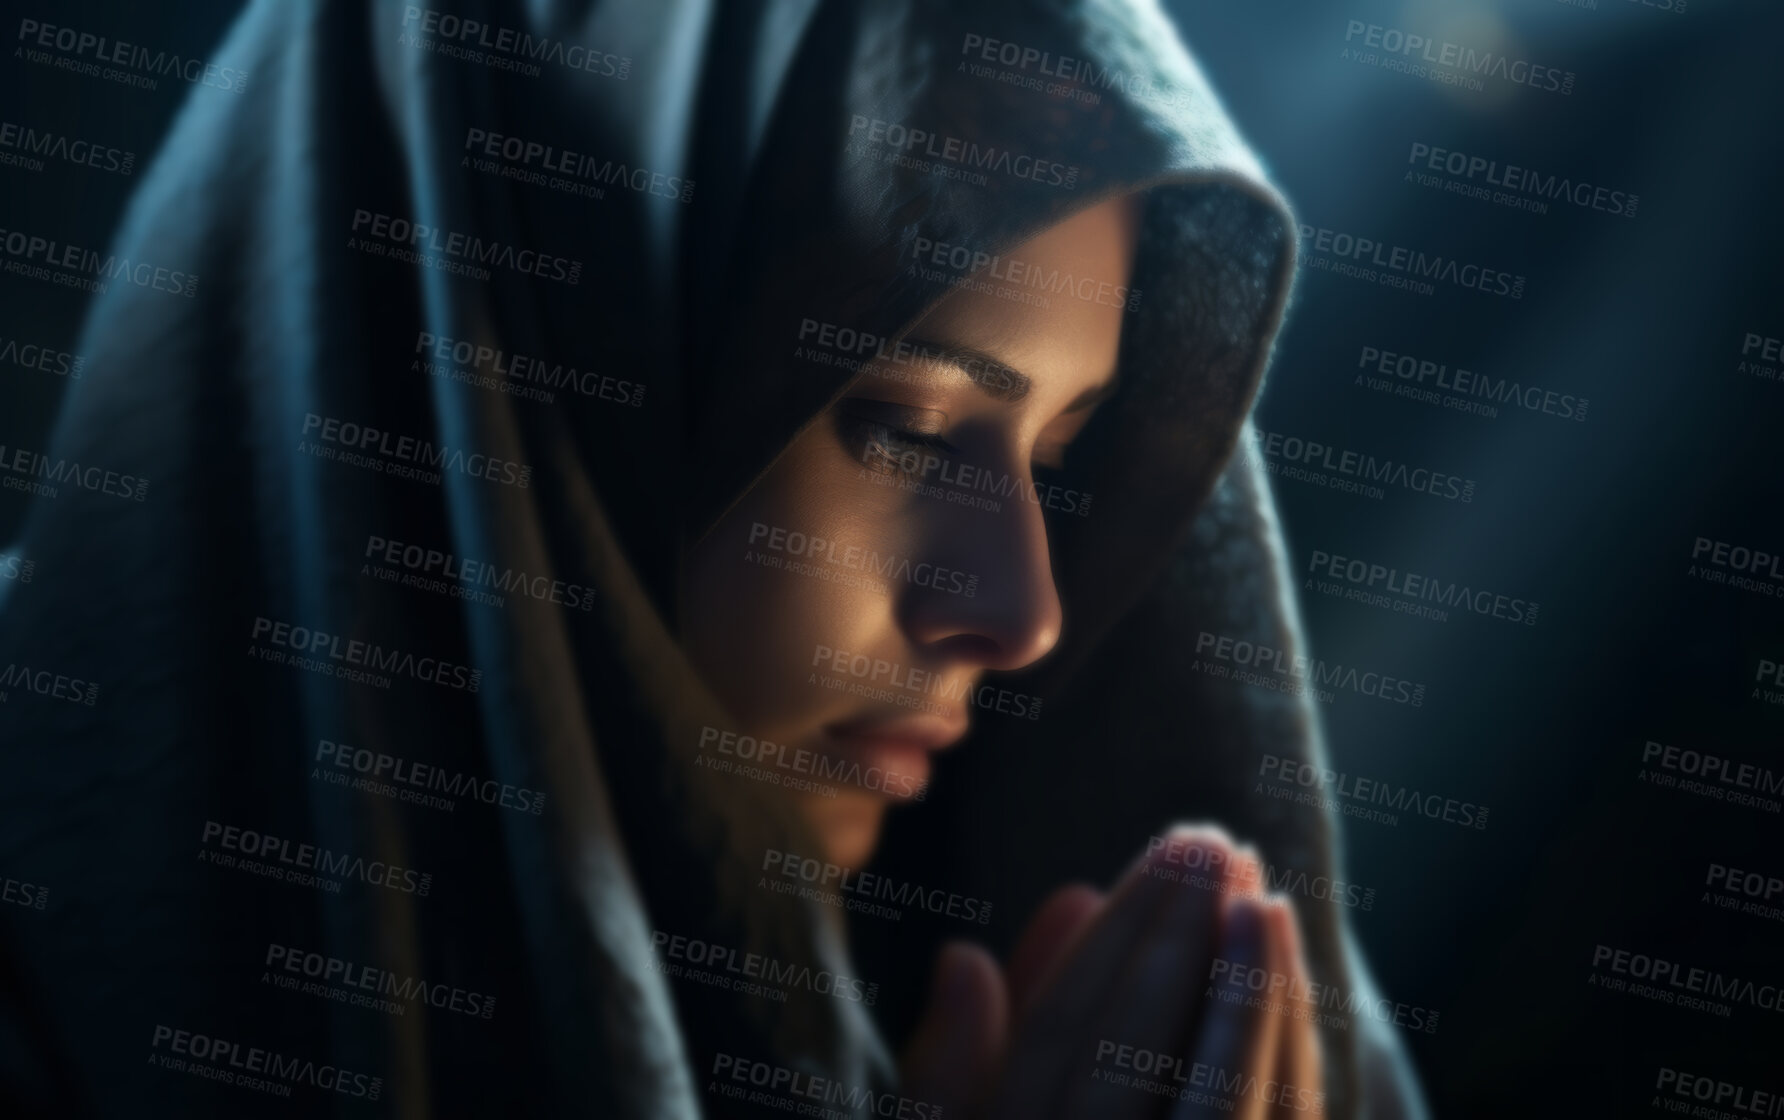 Buy stock photo Close up face of middle eastern woman praying in church. Religion concept.